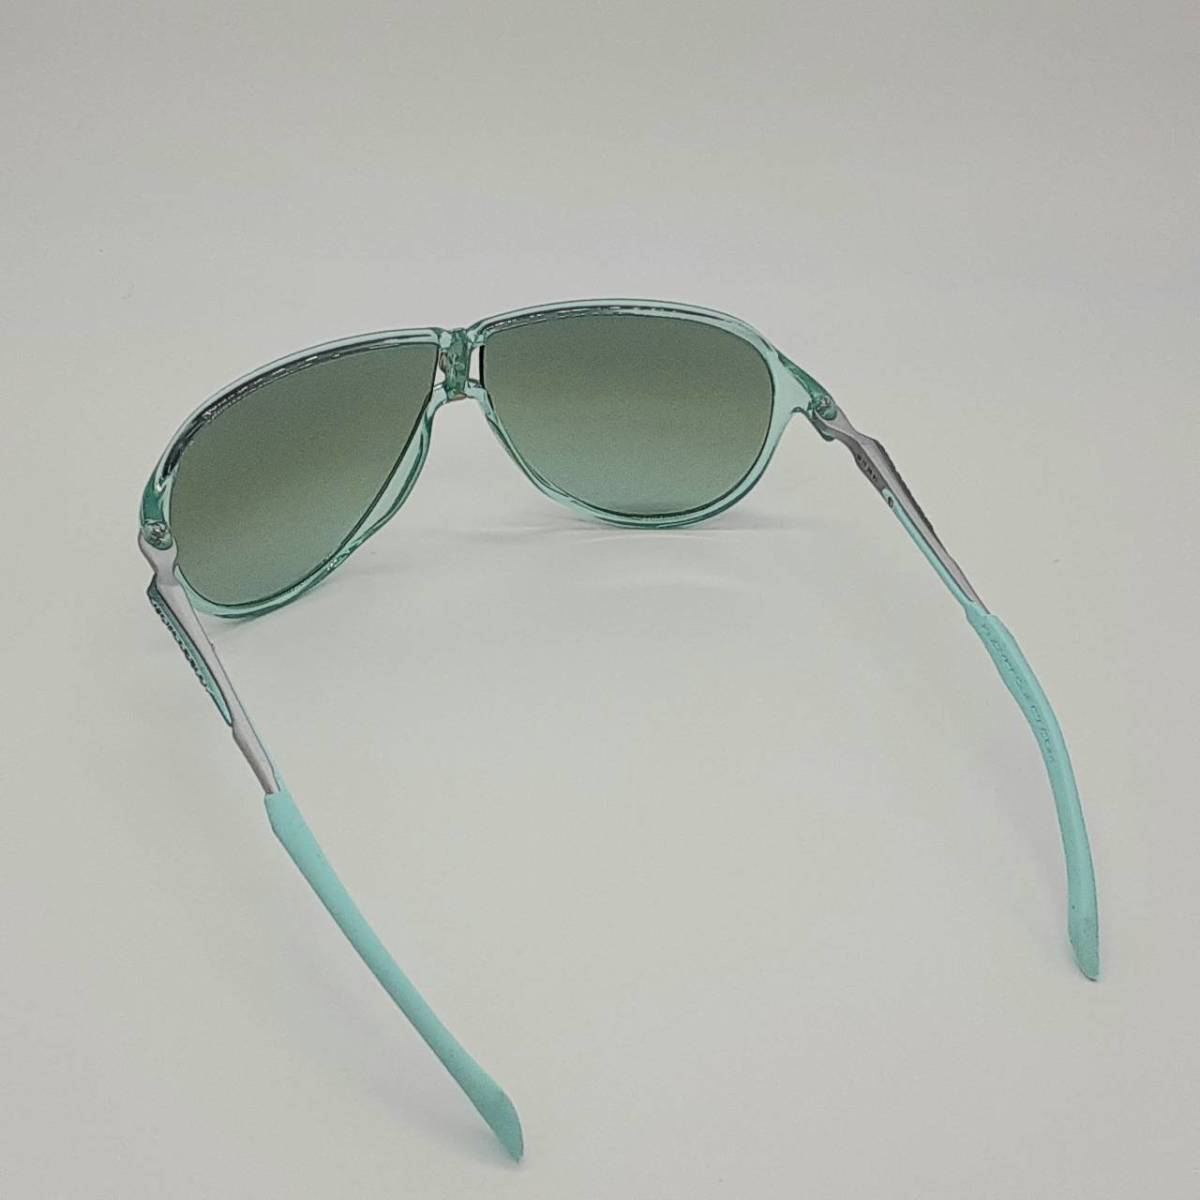  free shipping green LD lens light blue 0217-SP172881 RUDY PROJECT( Rudy Project ) prestige clear aqua frame new goods unused 